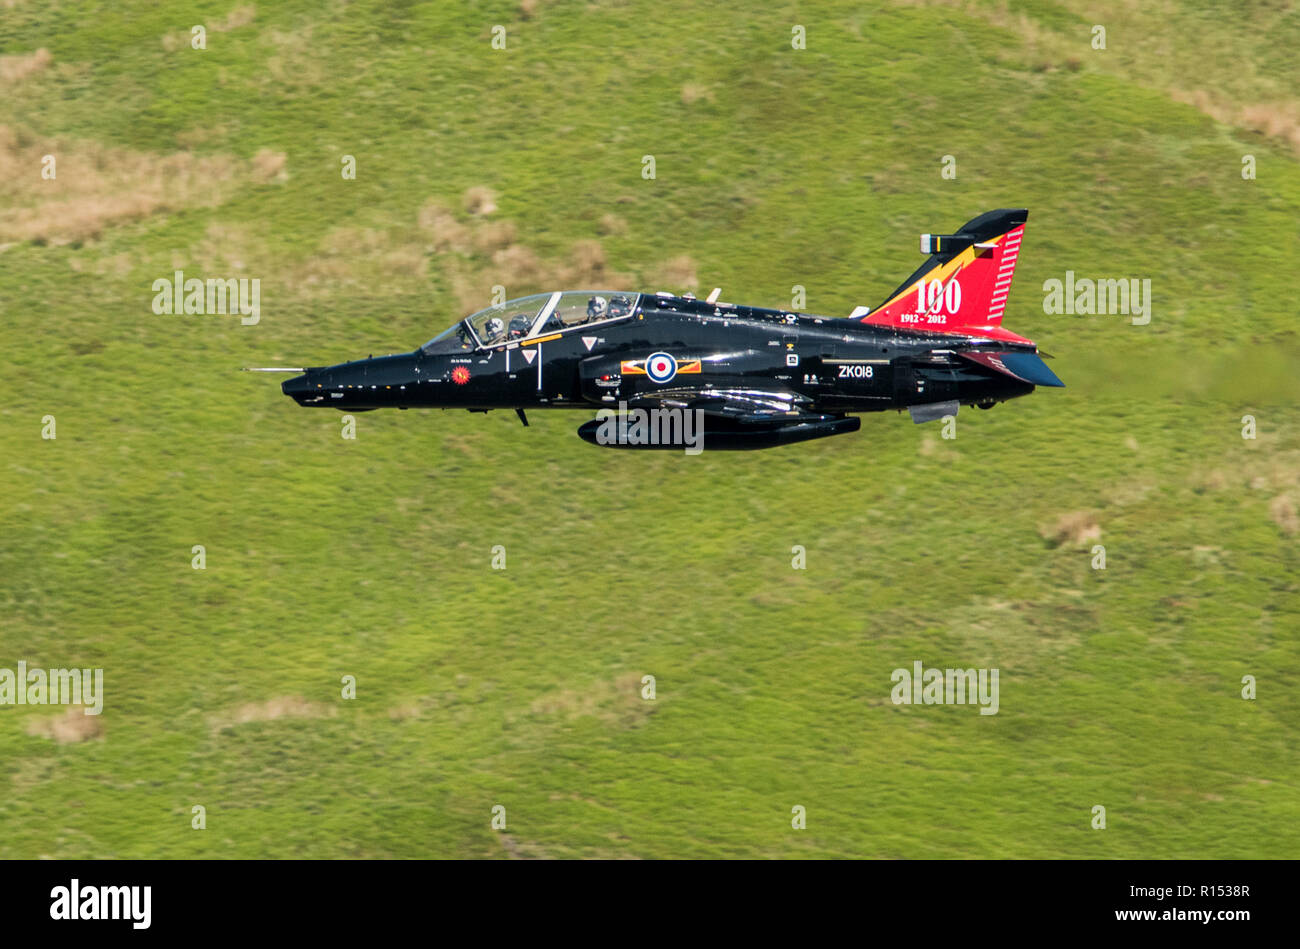 RAF HawkT1 fighter jet training in the Mac Loop area of Machynlleth Mid Wales England UK. Stock Photo